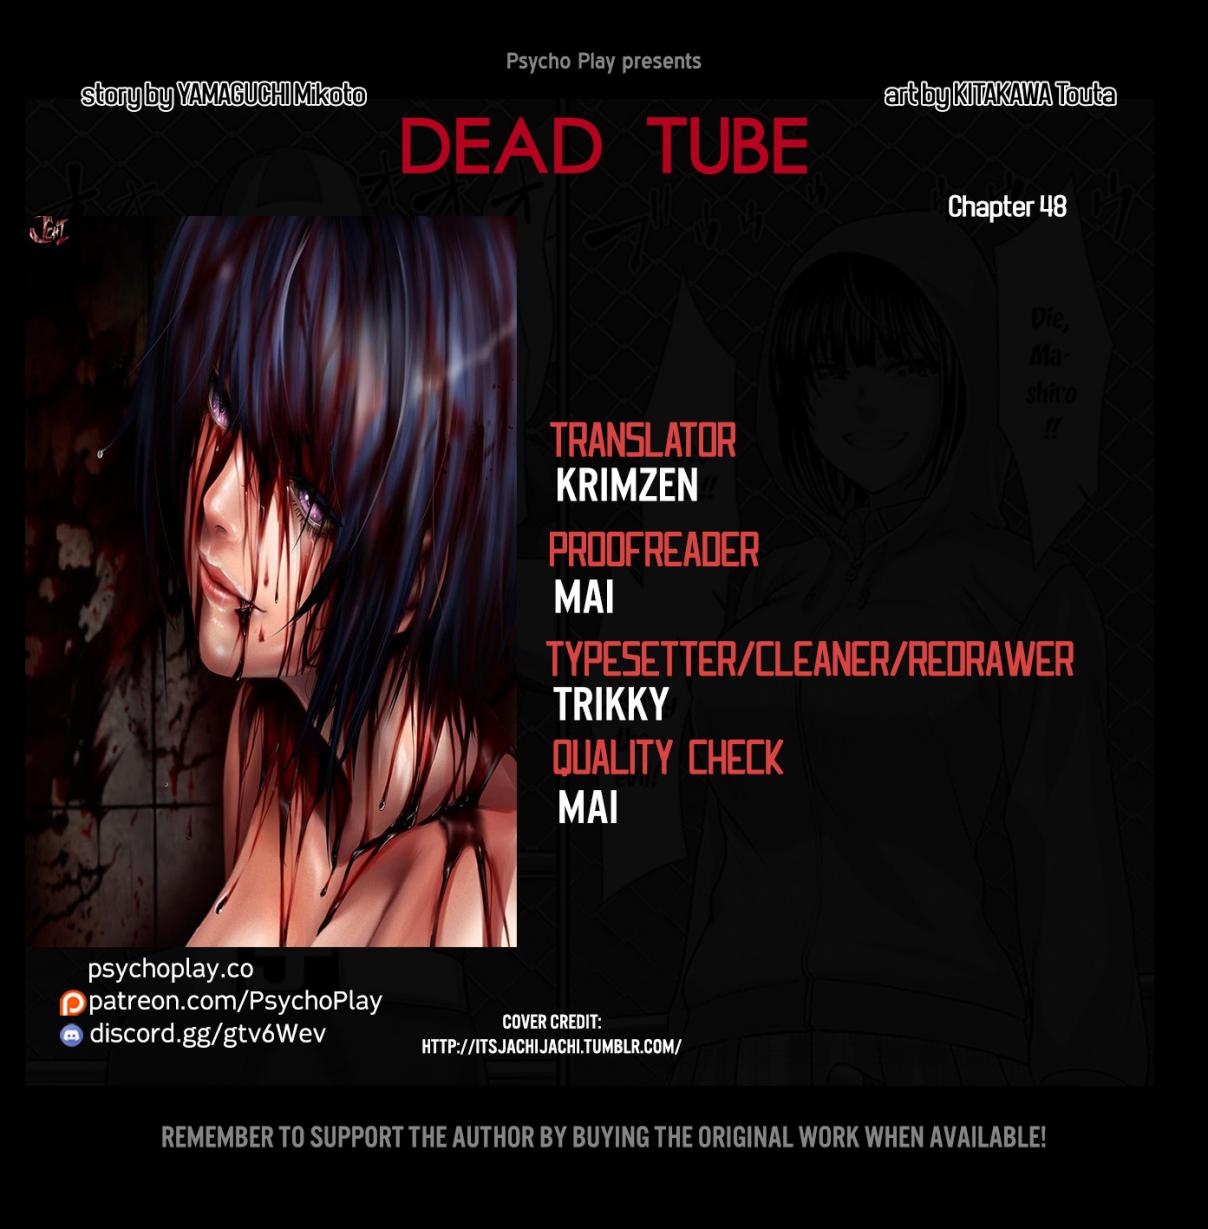 DEAD Tube Vol. 12 Ch. 48 Take 48 Who is the kill target?